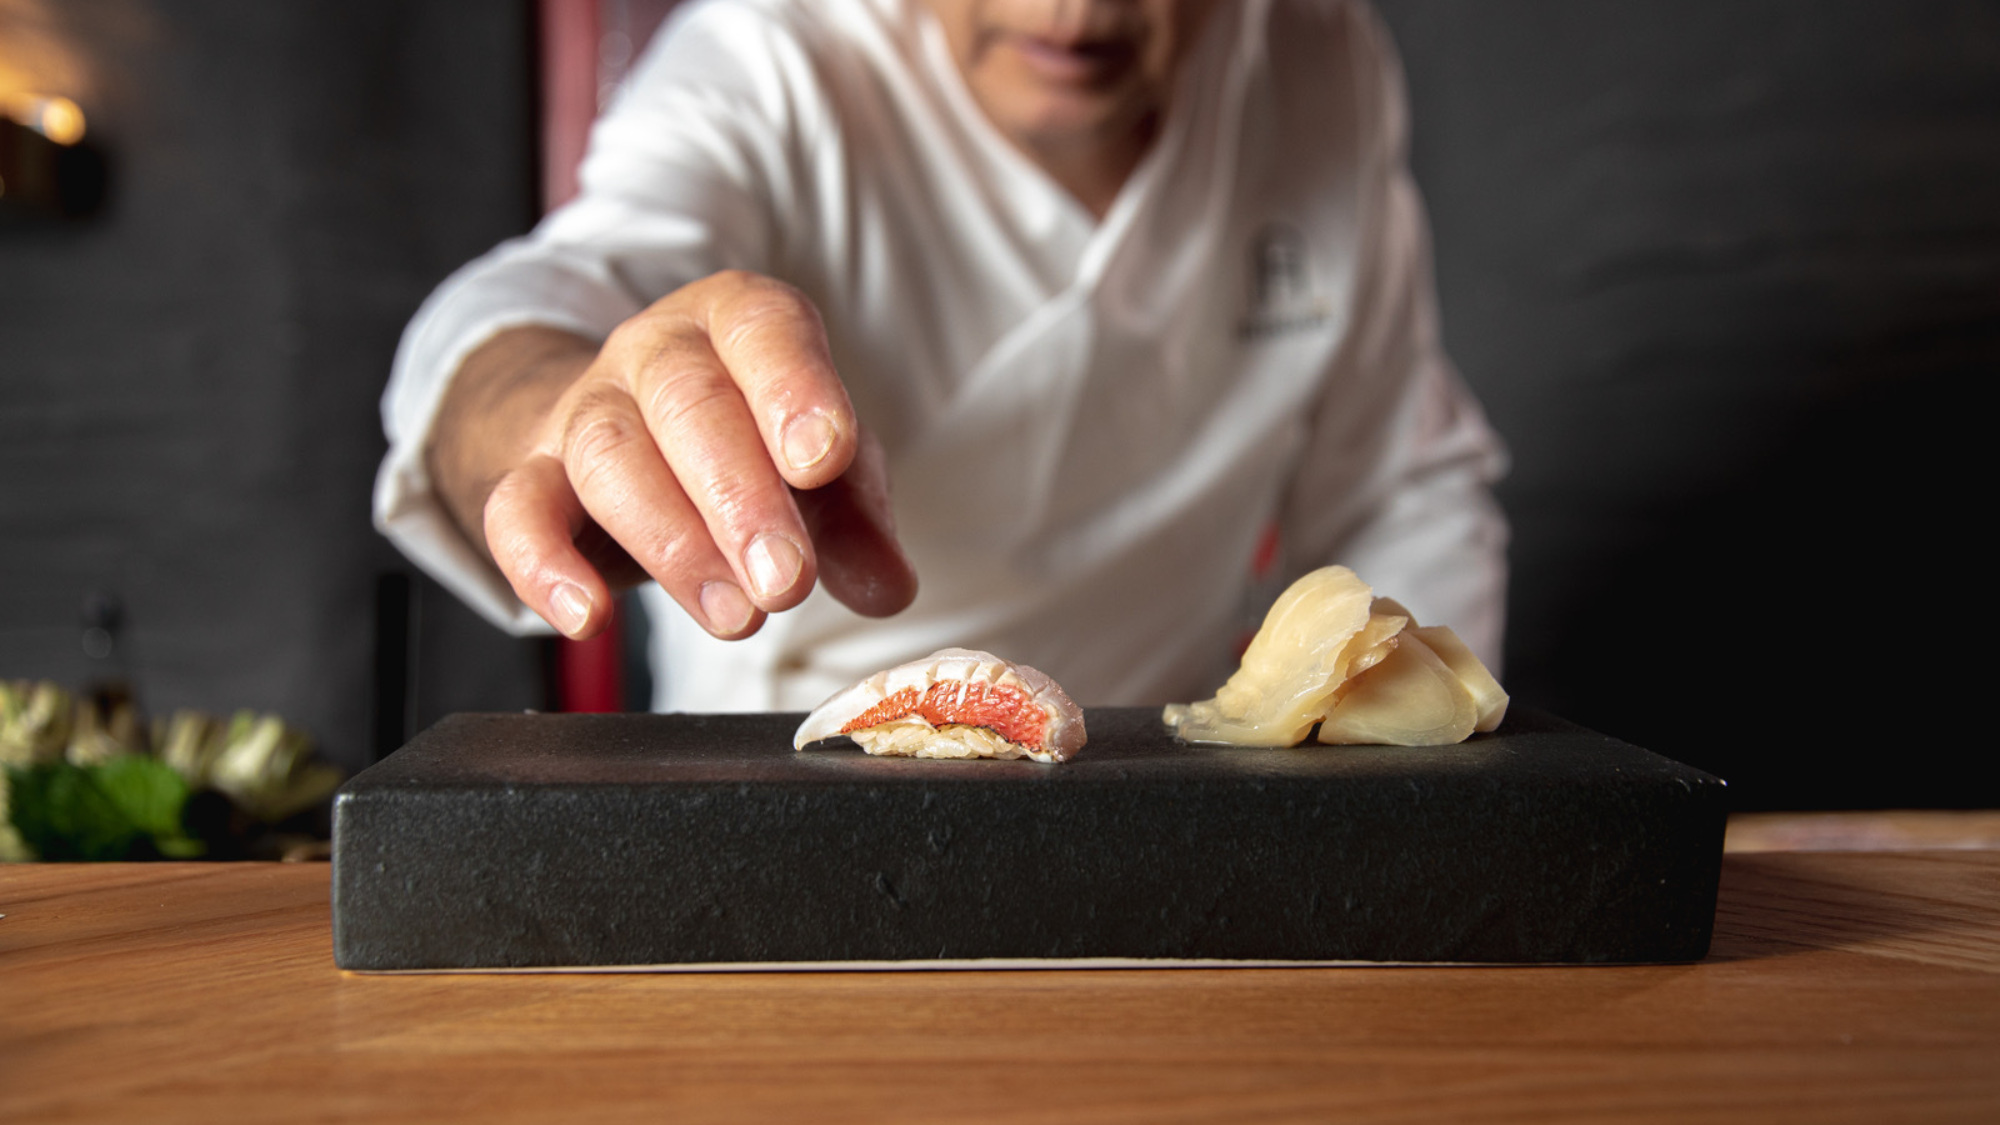 An exquisite Omakase Dining experience awaits your discovery